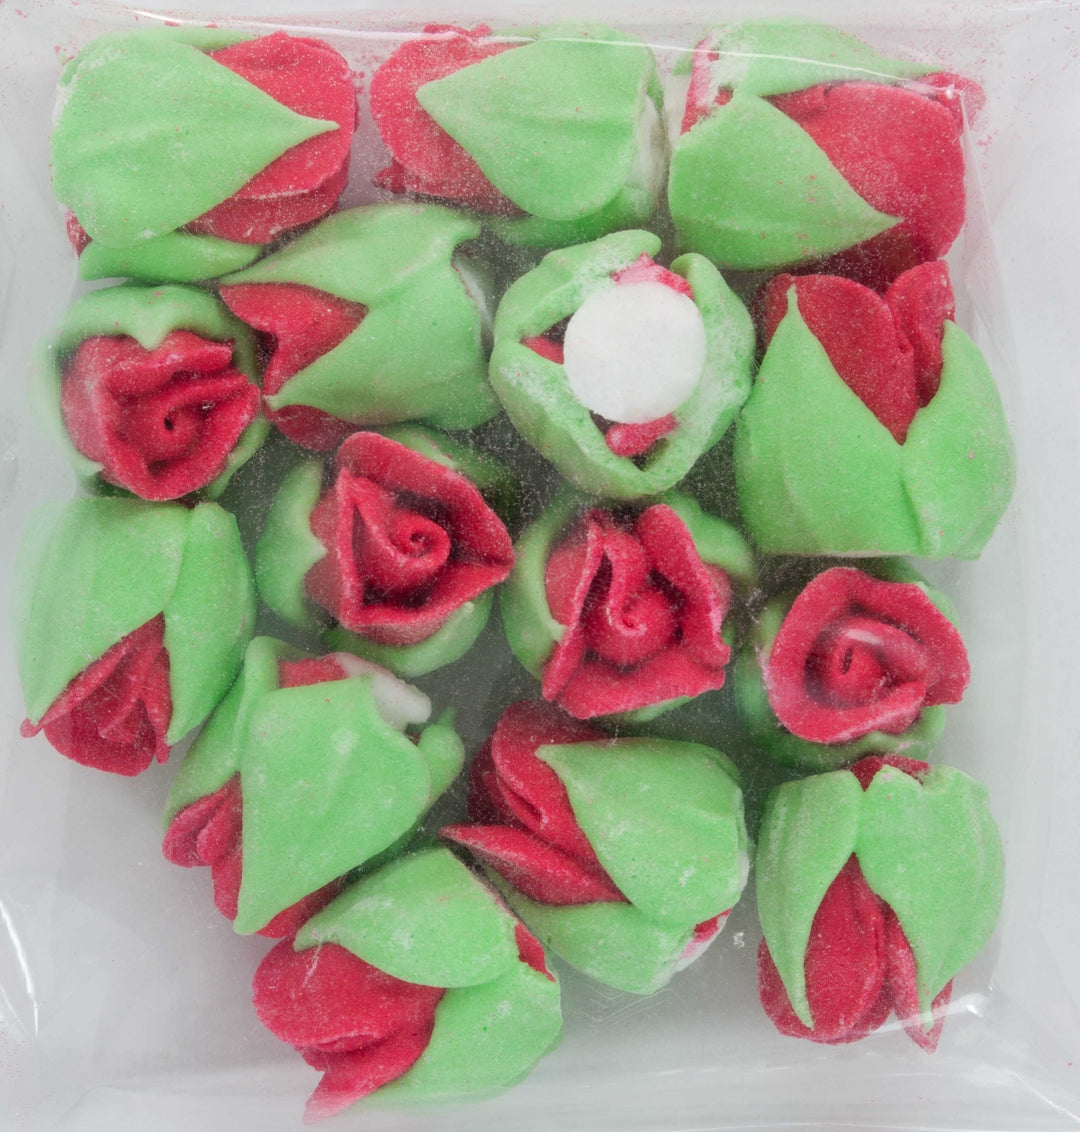 Edible Icing Roses with Leaves - Red